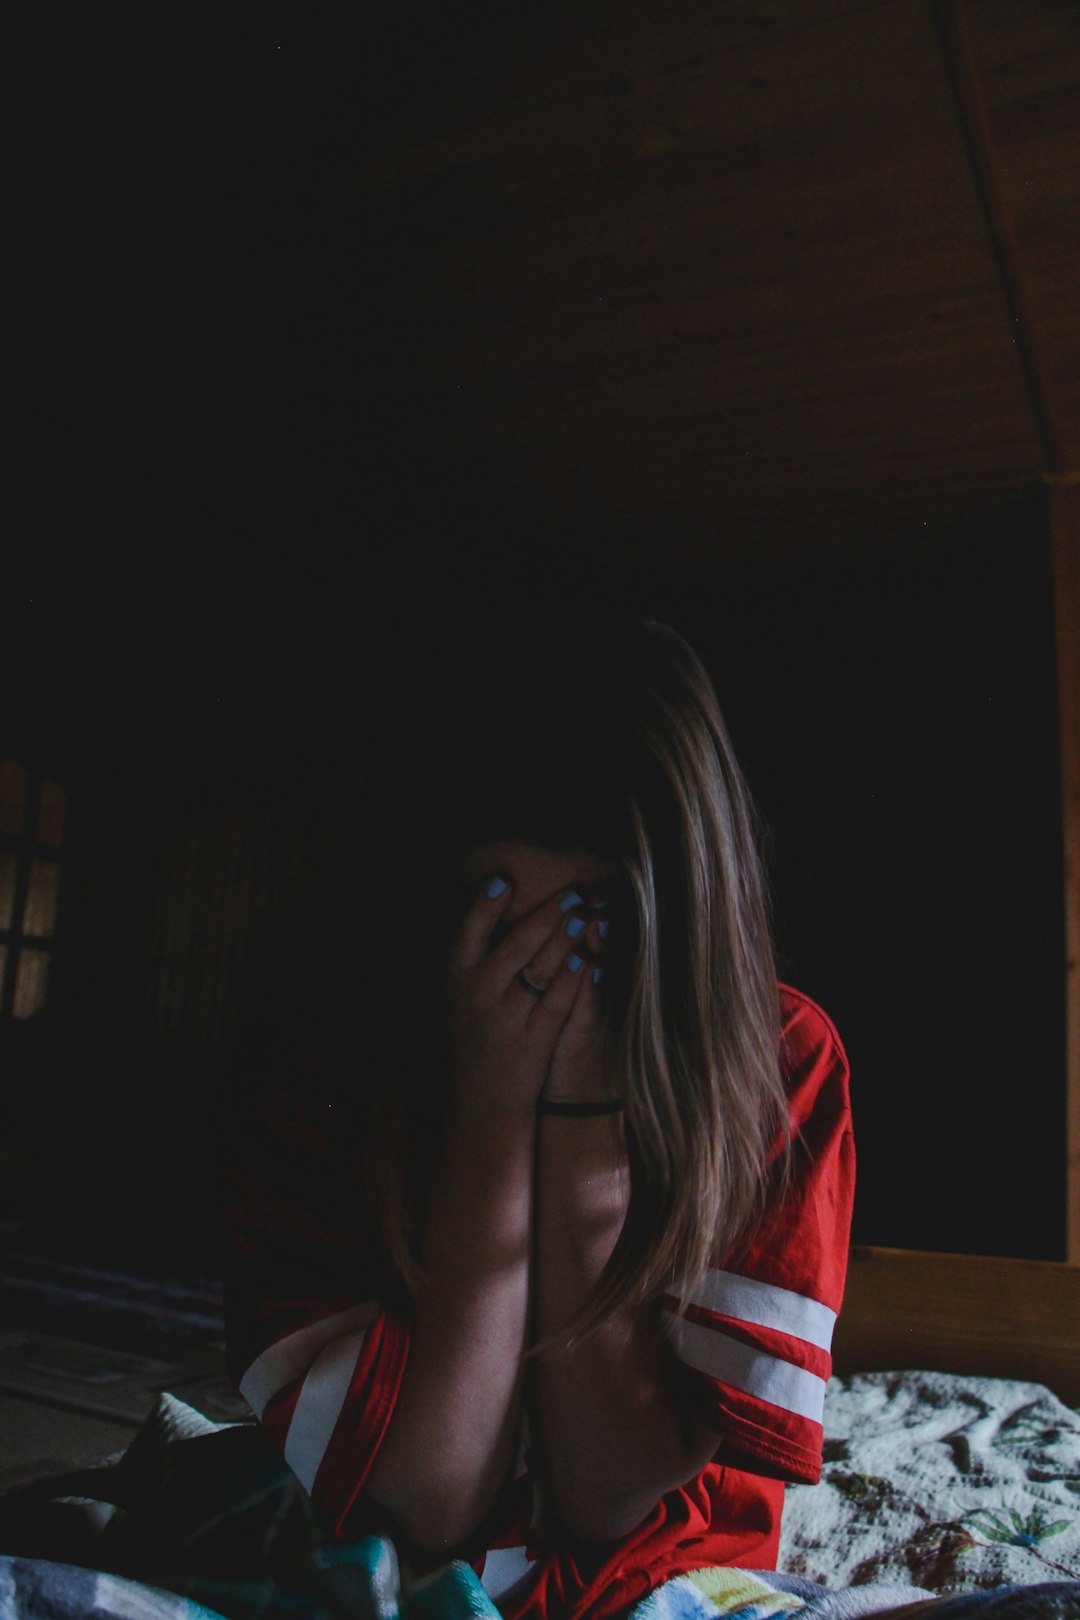 woman wearing red and shirt covering her face